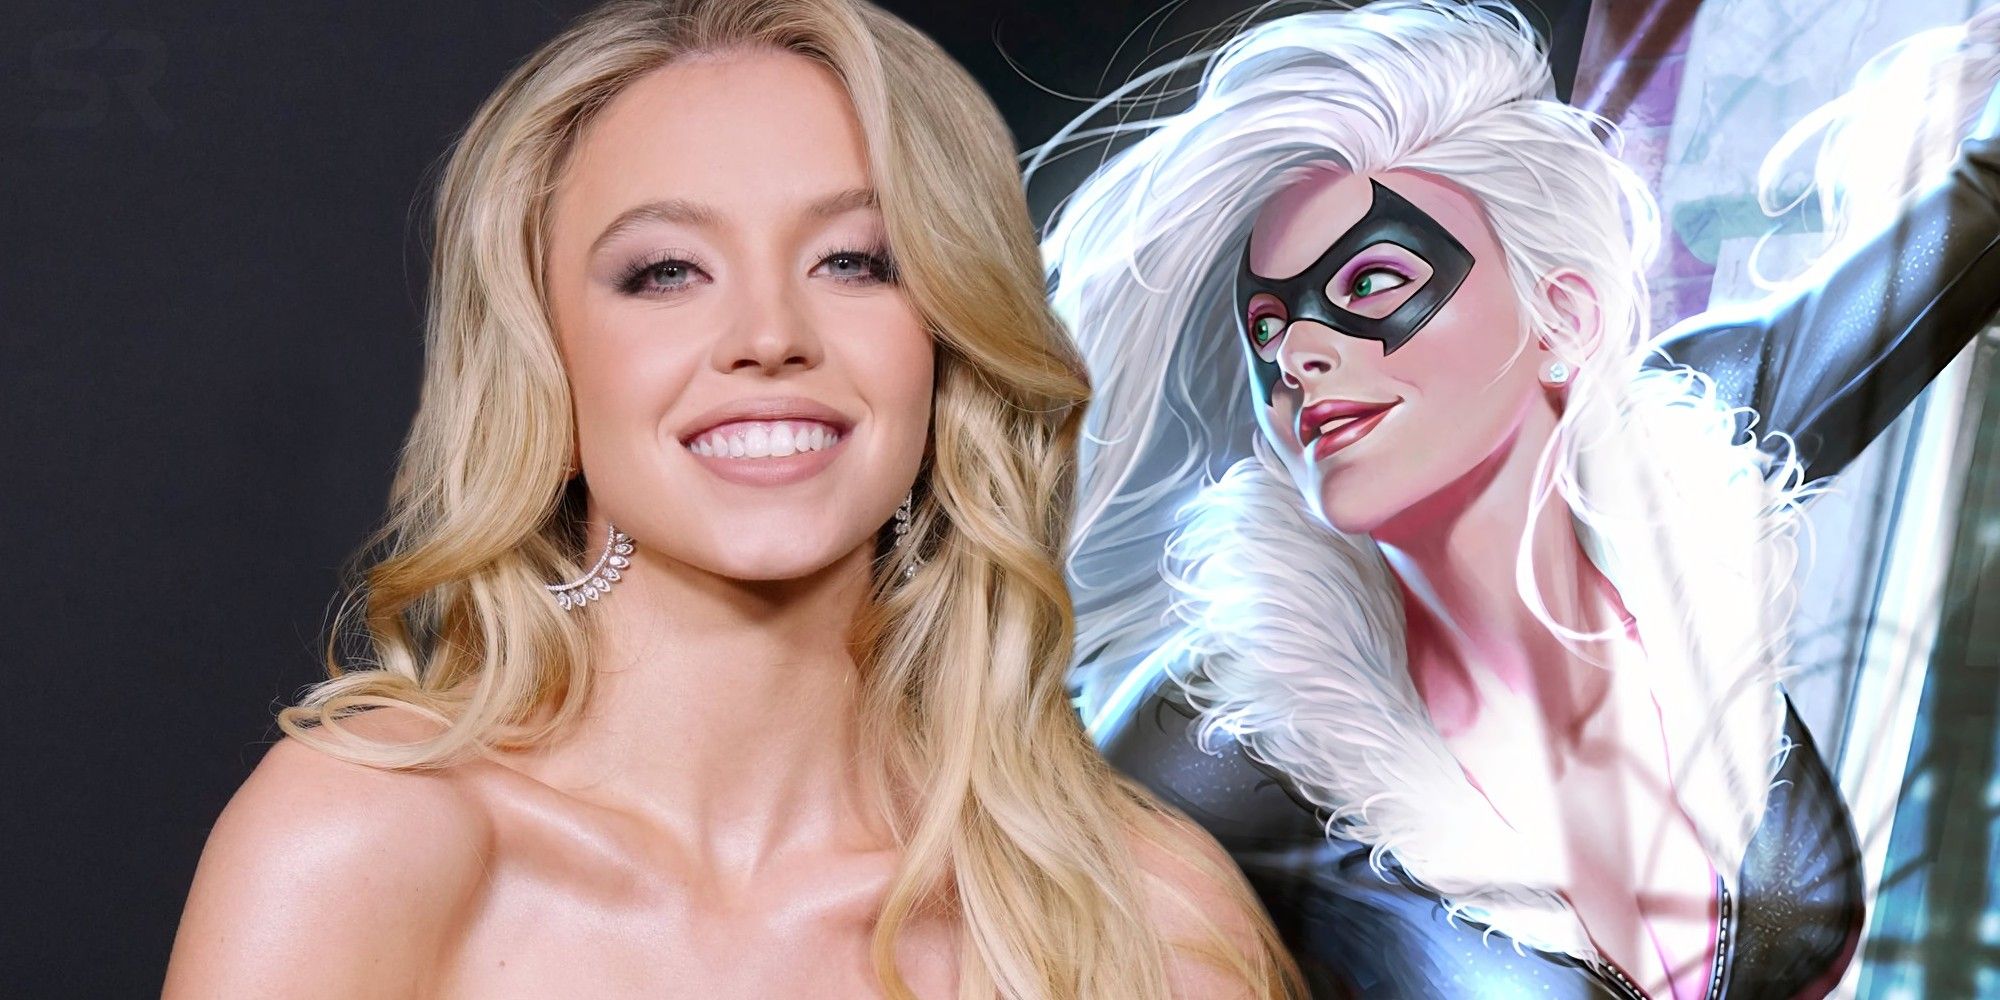 Spider-Man Fans Speculate Sydney Sweeney Is Playing Black Cat